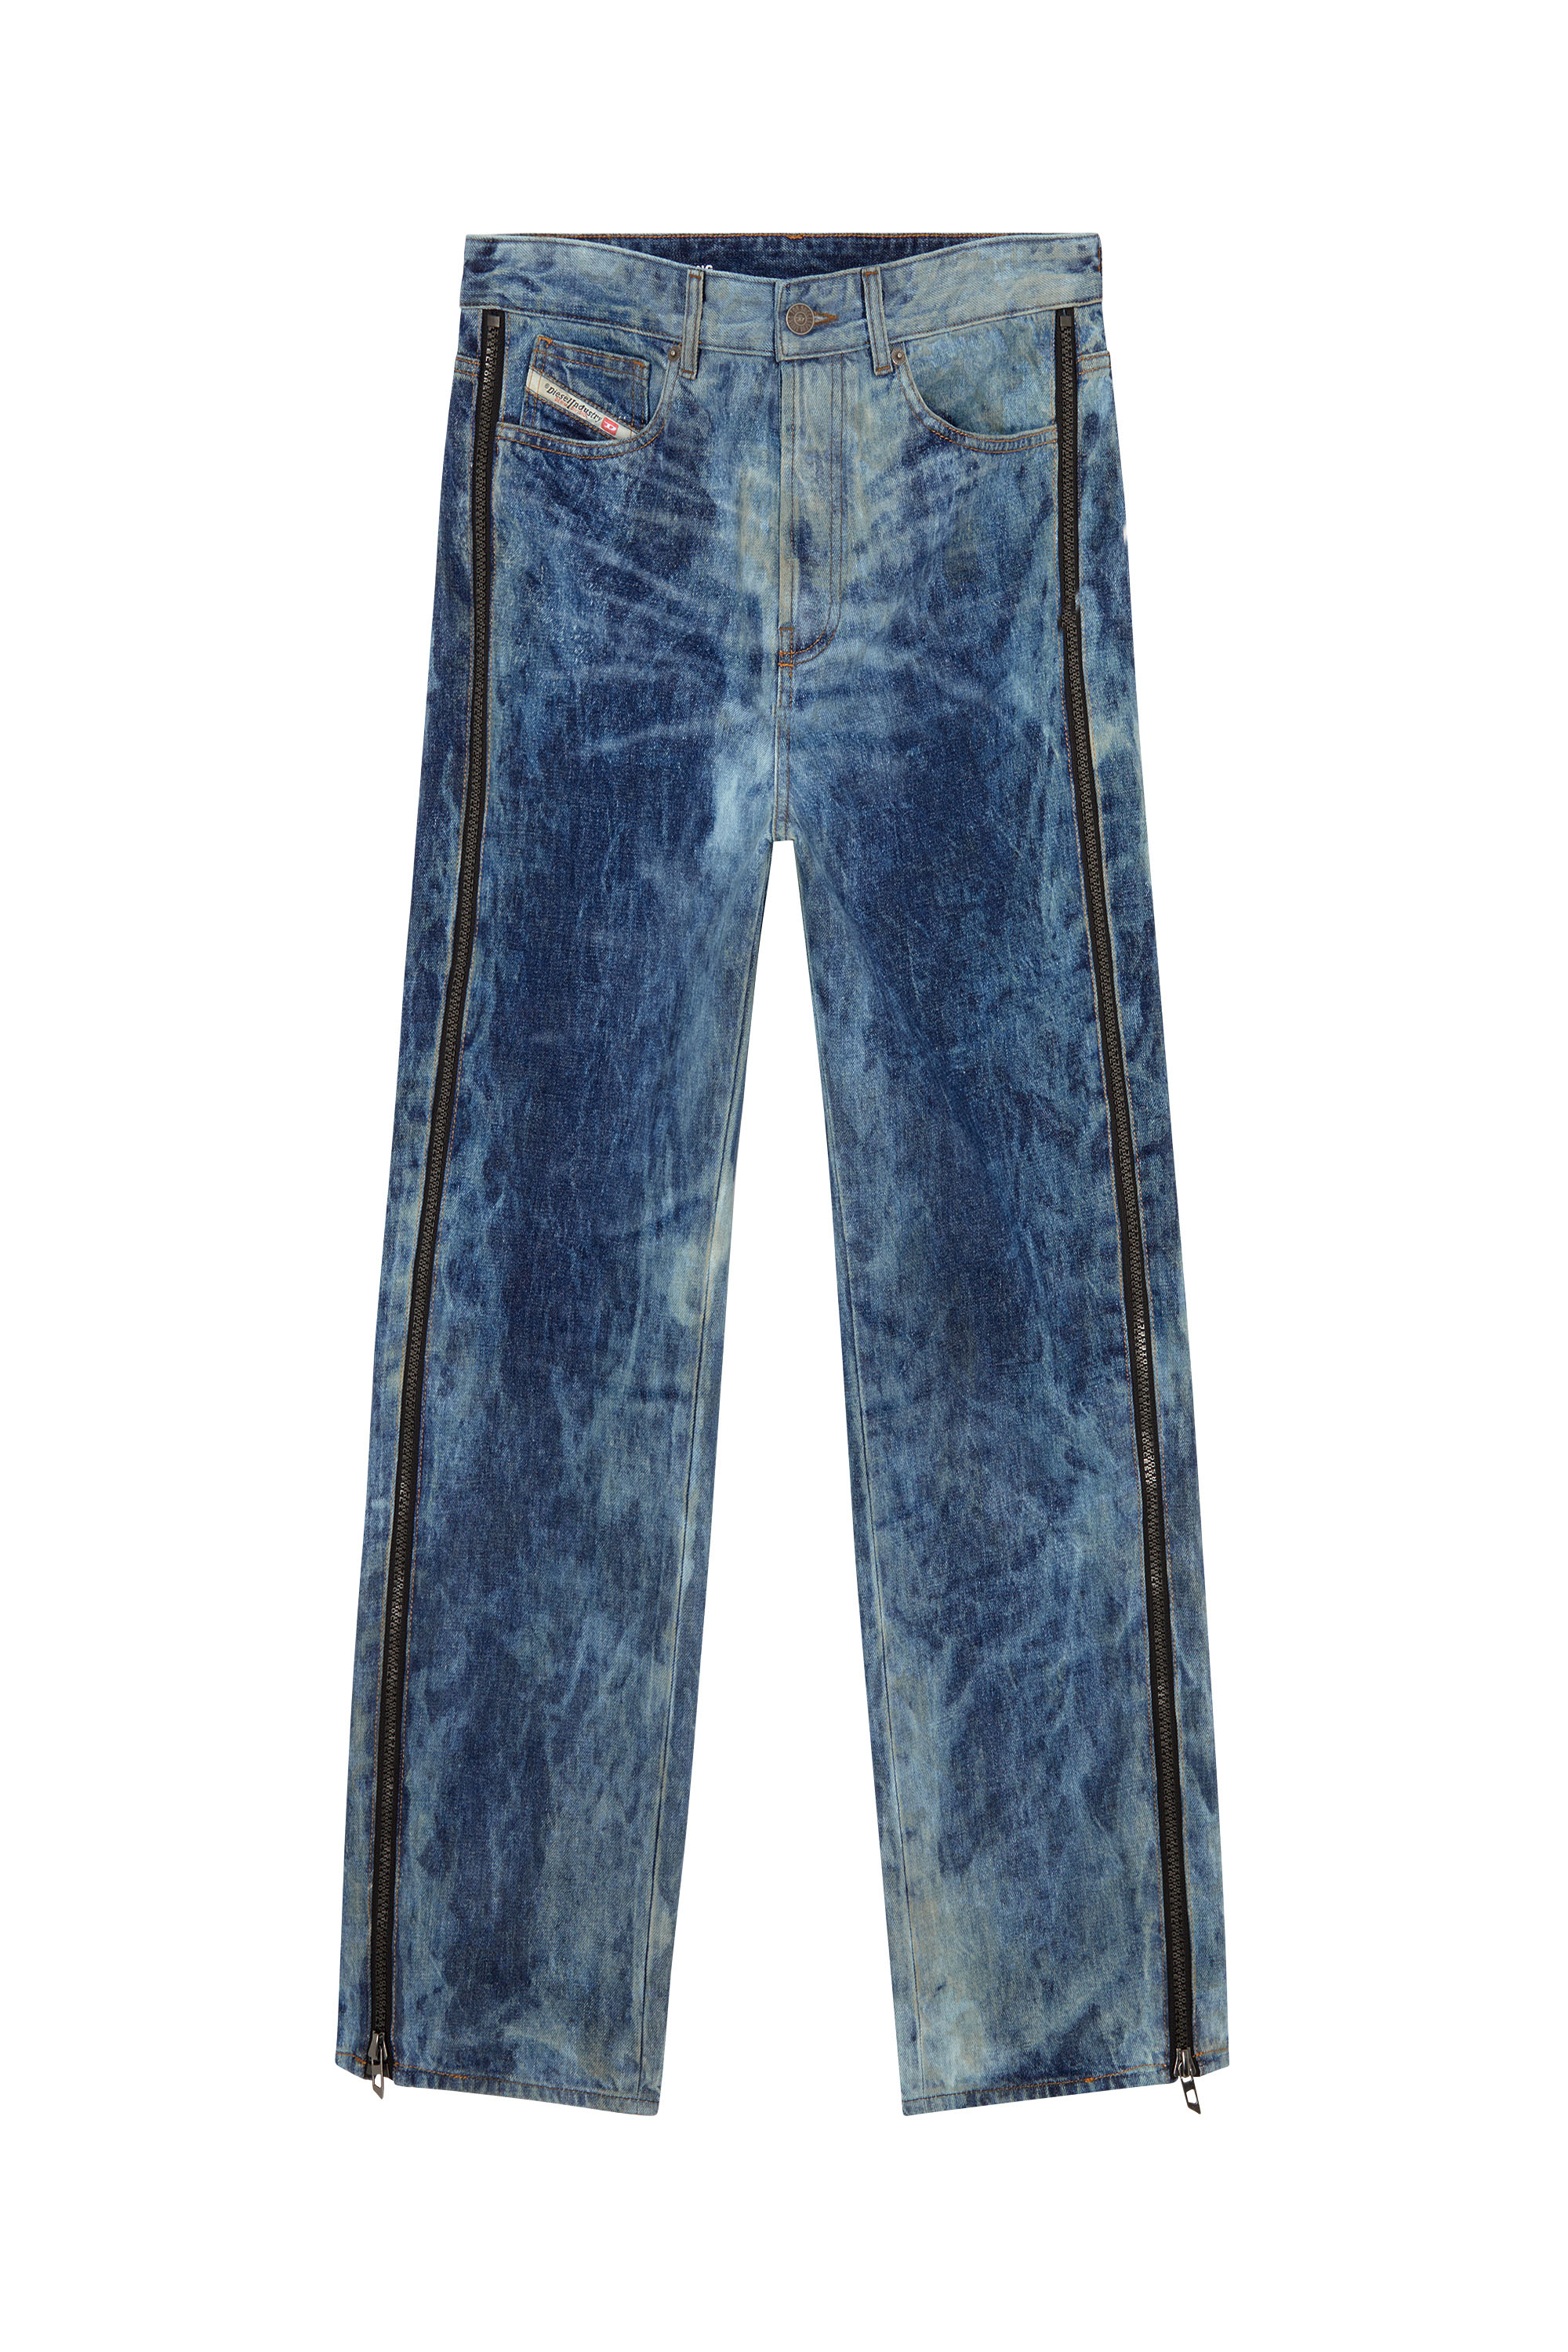 Diesel - Straight Jeans D-Rise 0PGAX, Hombre Straight Jeans - D-Rise in Azul marino - Image 5